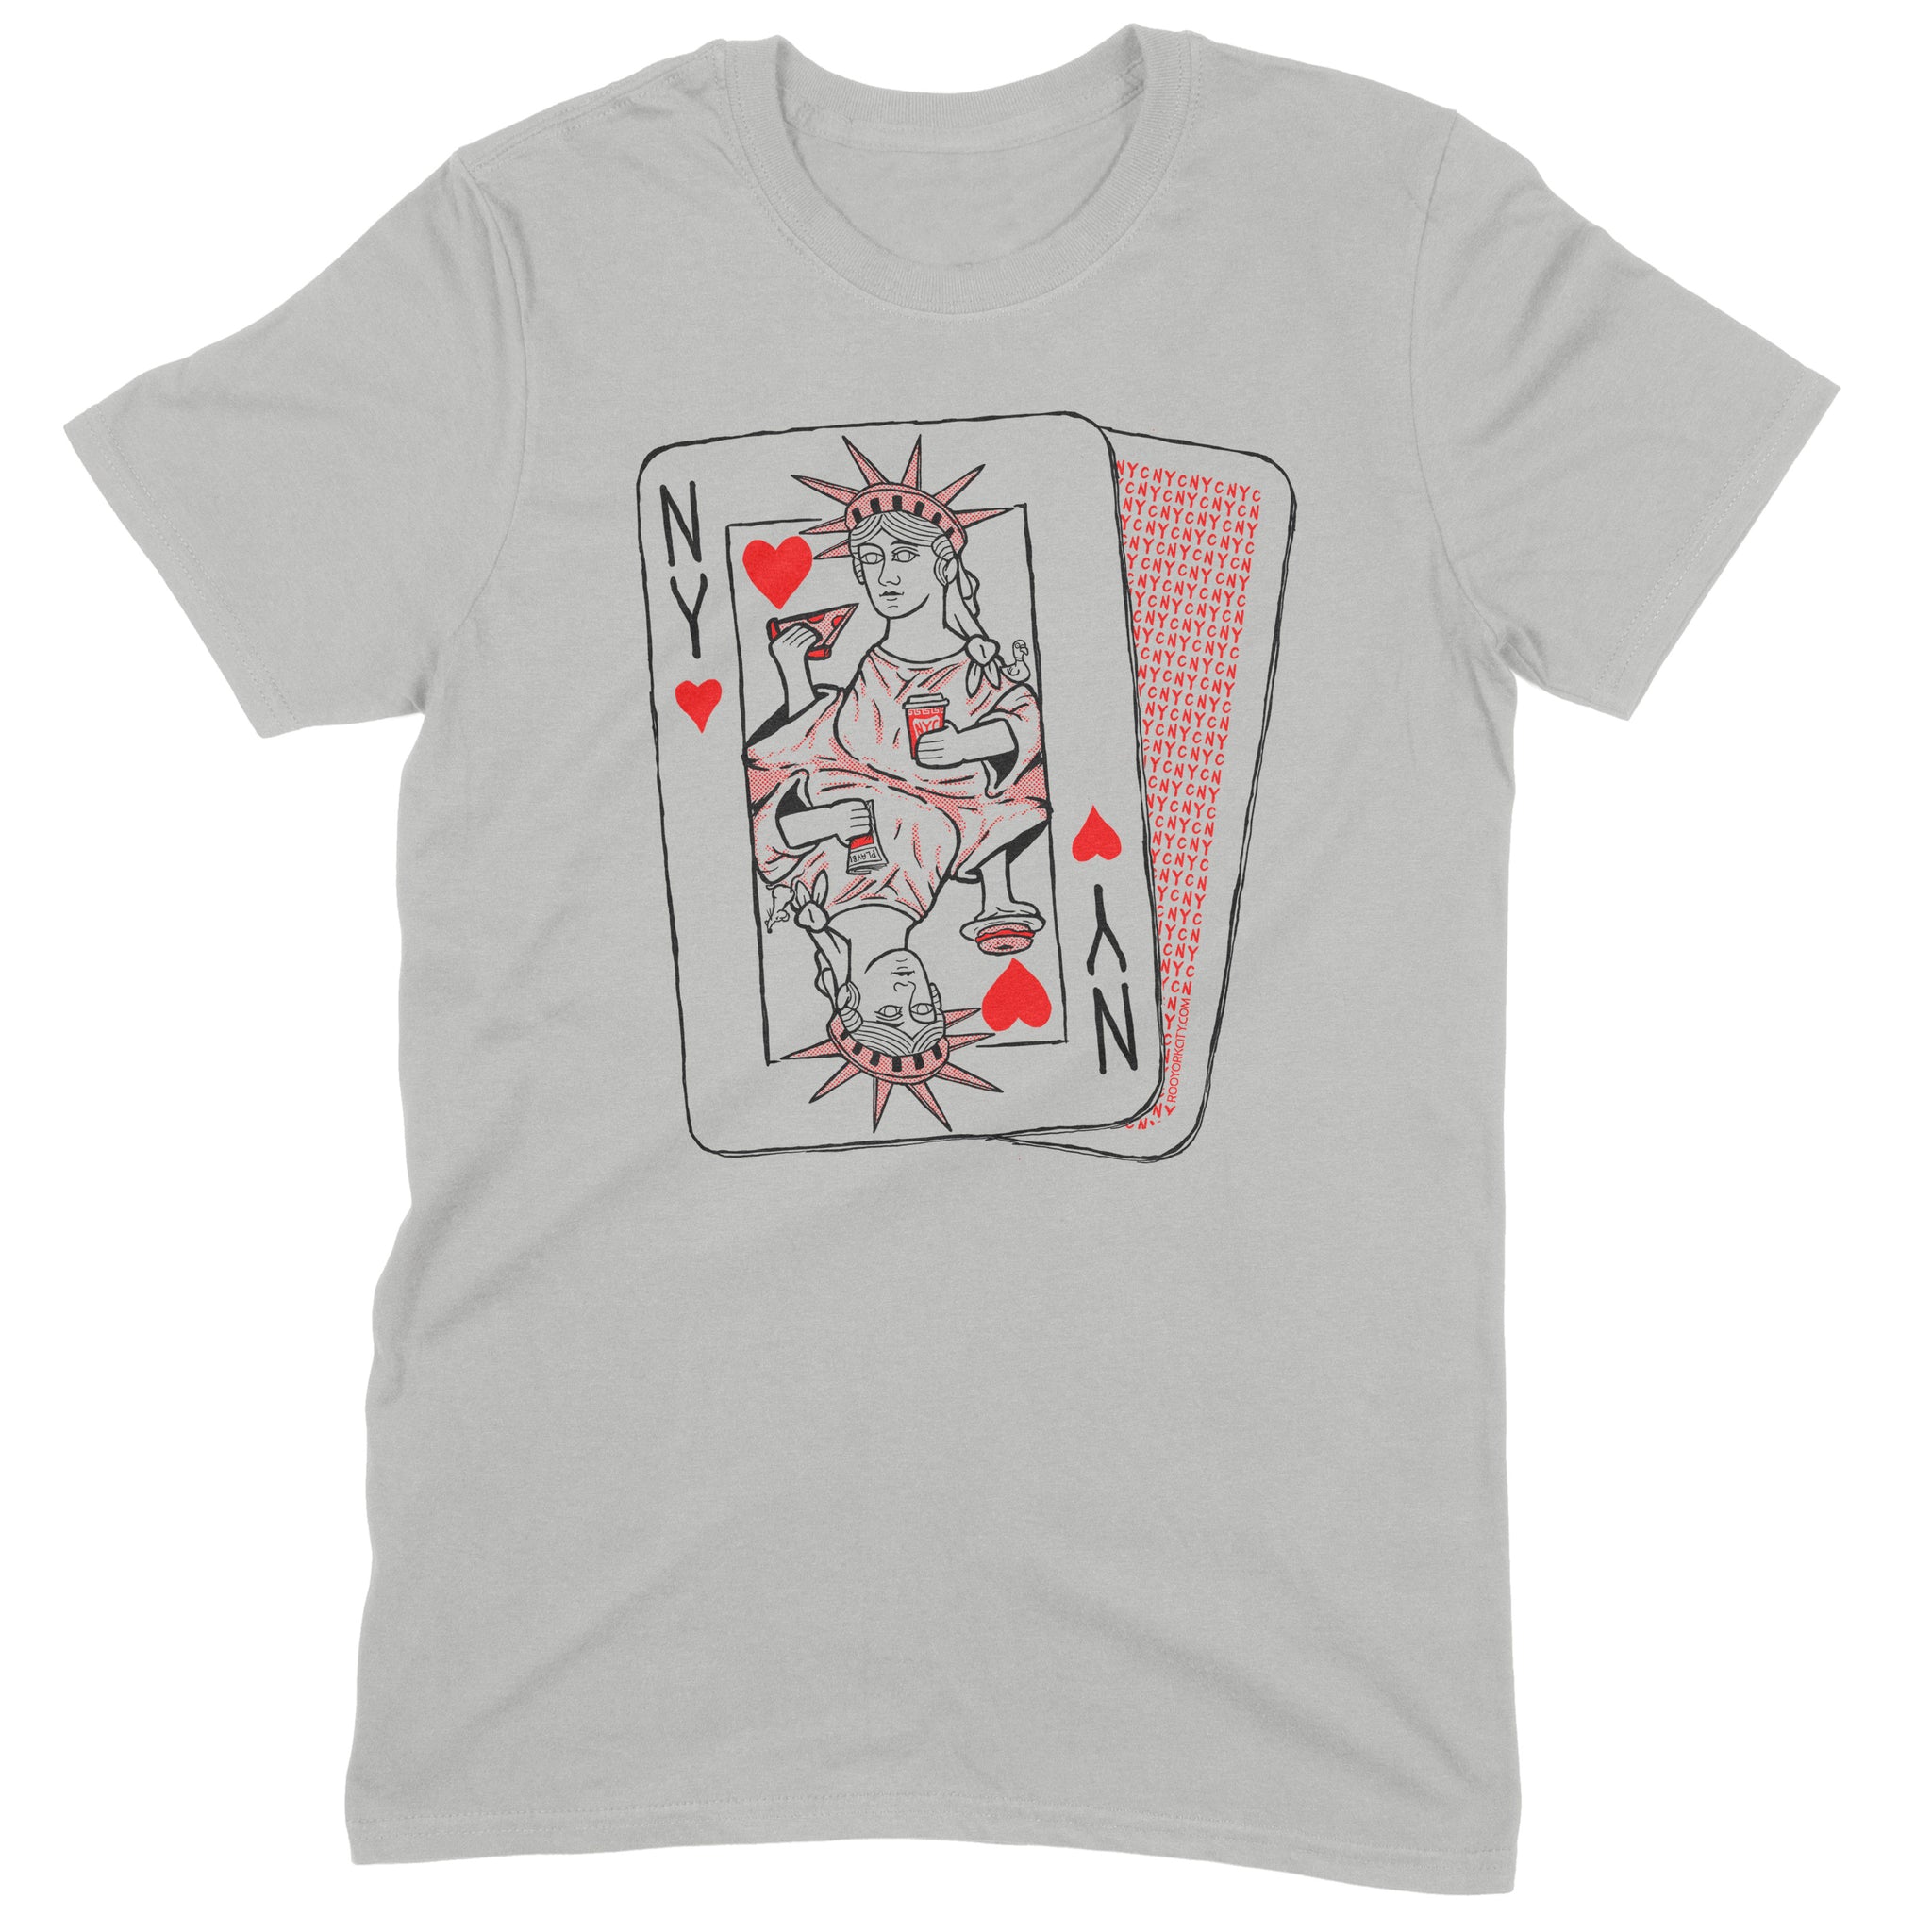 NYC Statue of Liberty Queen of Hearts Playing Card Shirt (Hand Drawn // Hand Printed)